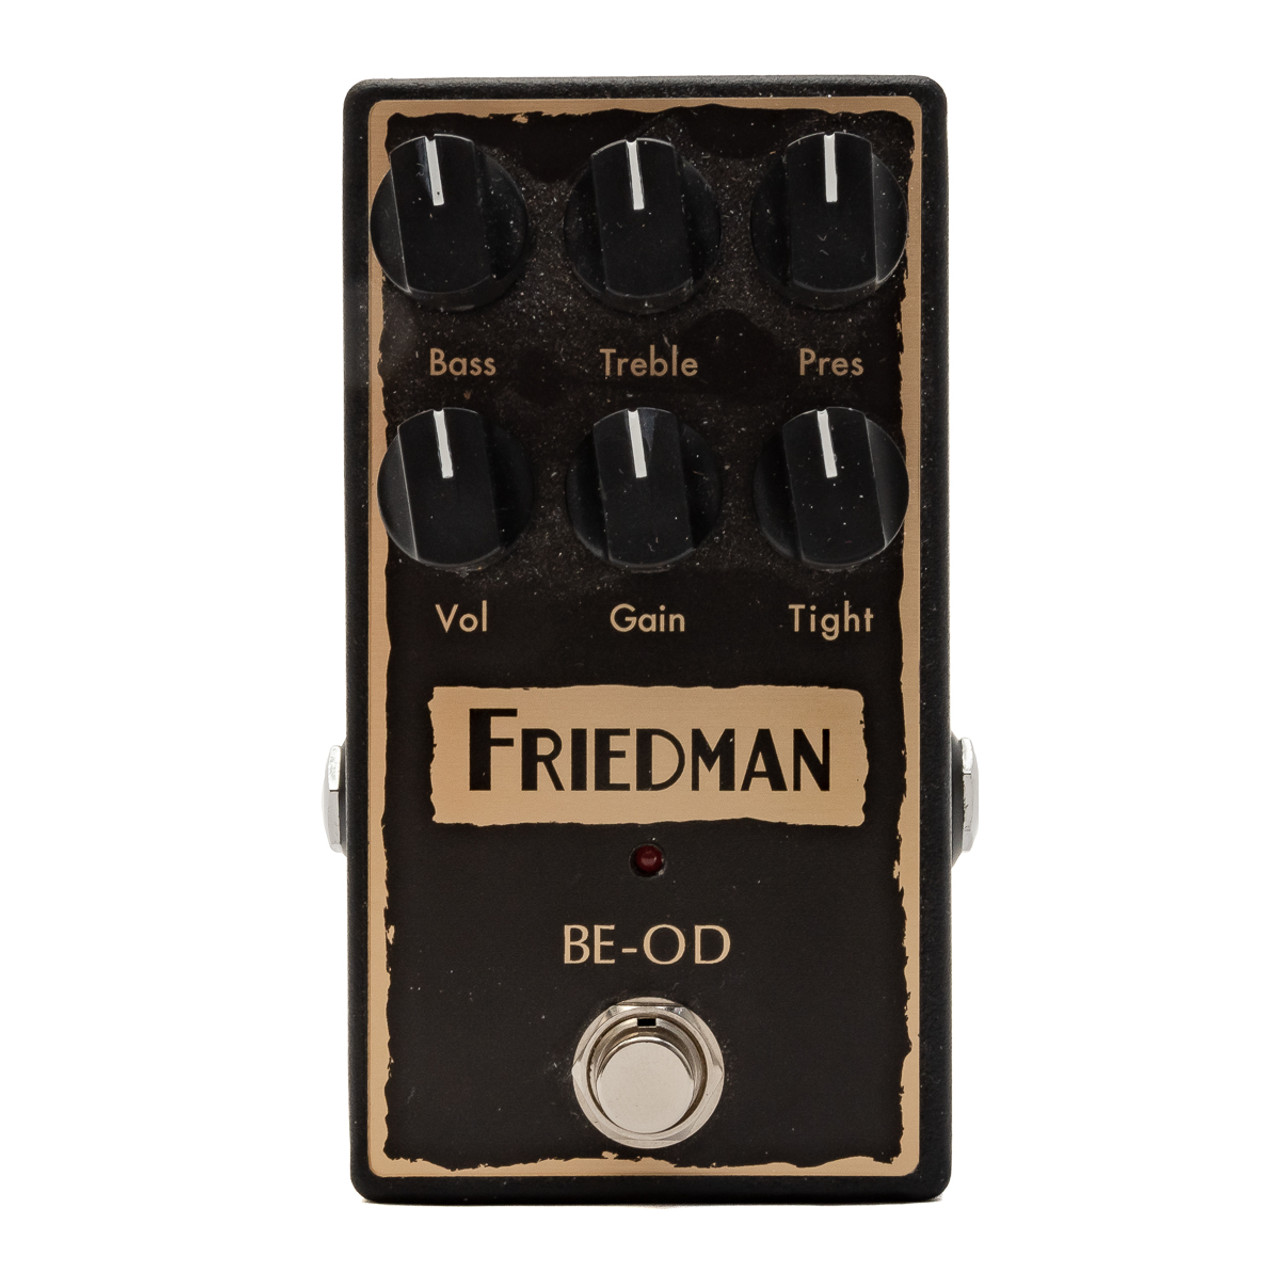 Friedman - BE-OD - Overdrive Pedal - x3210 (USED) (ISS53209)